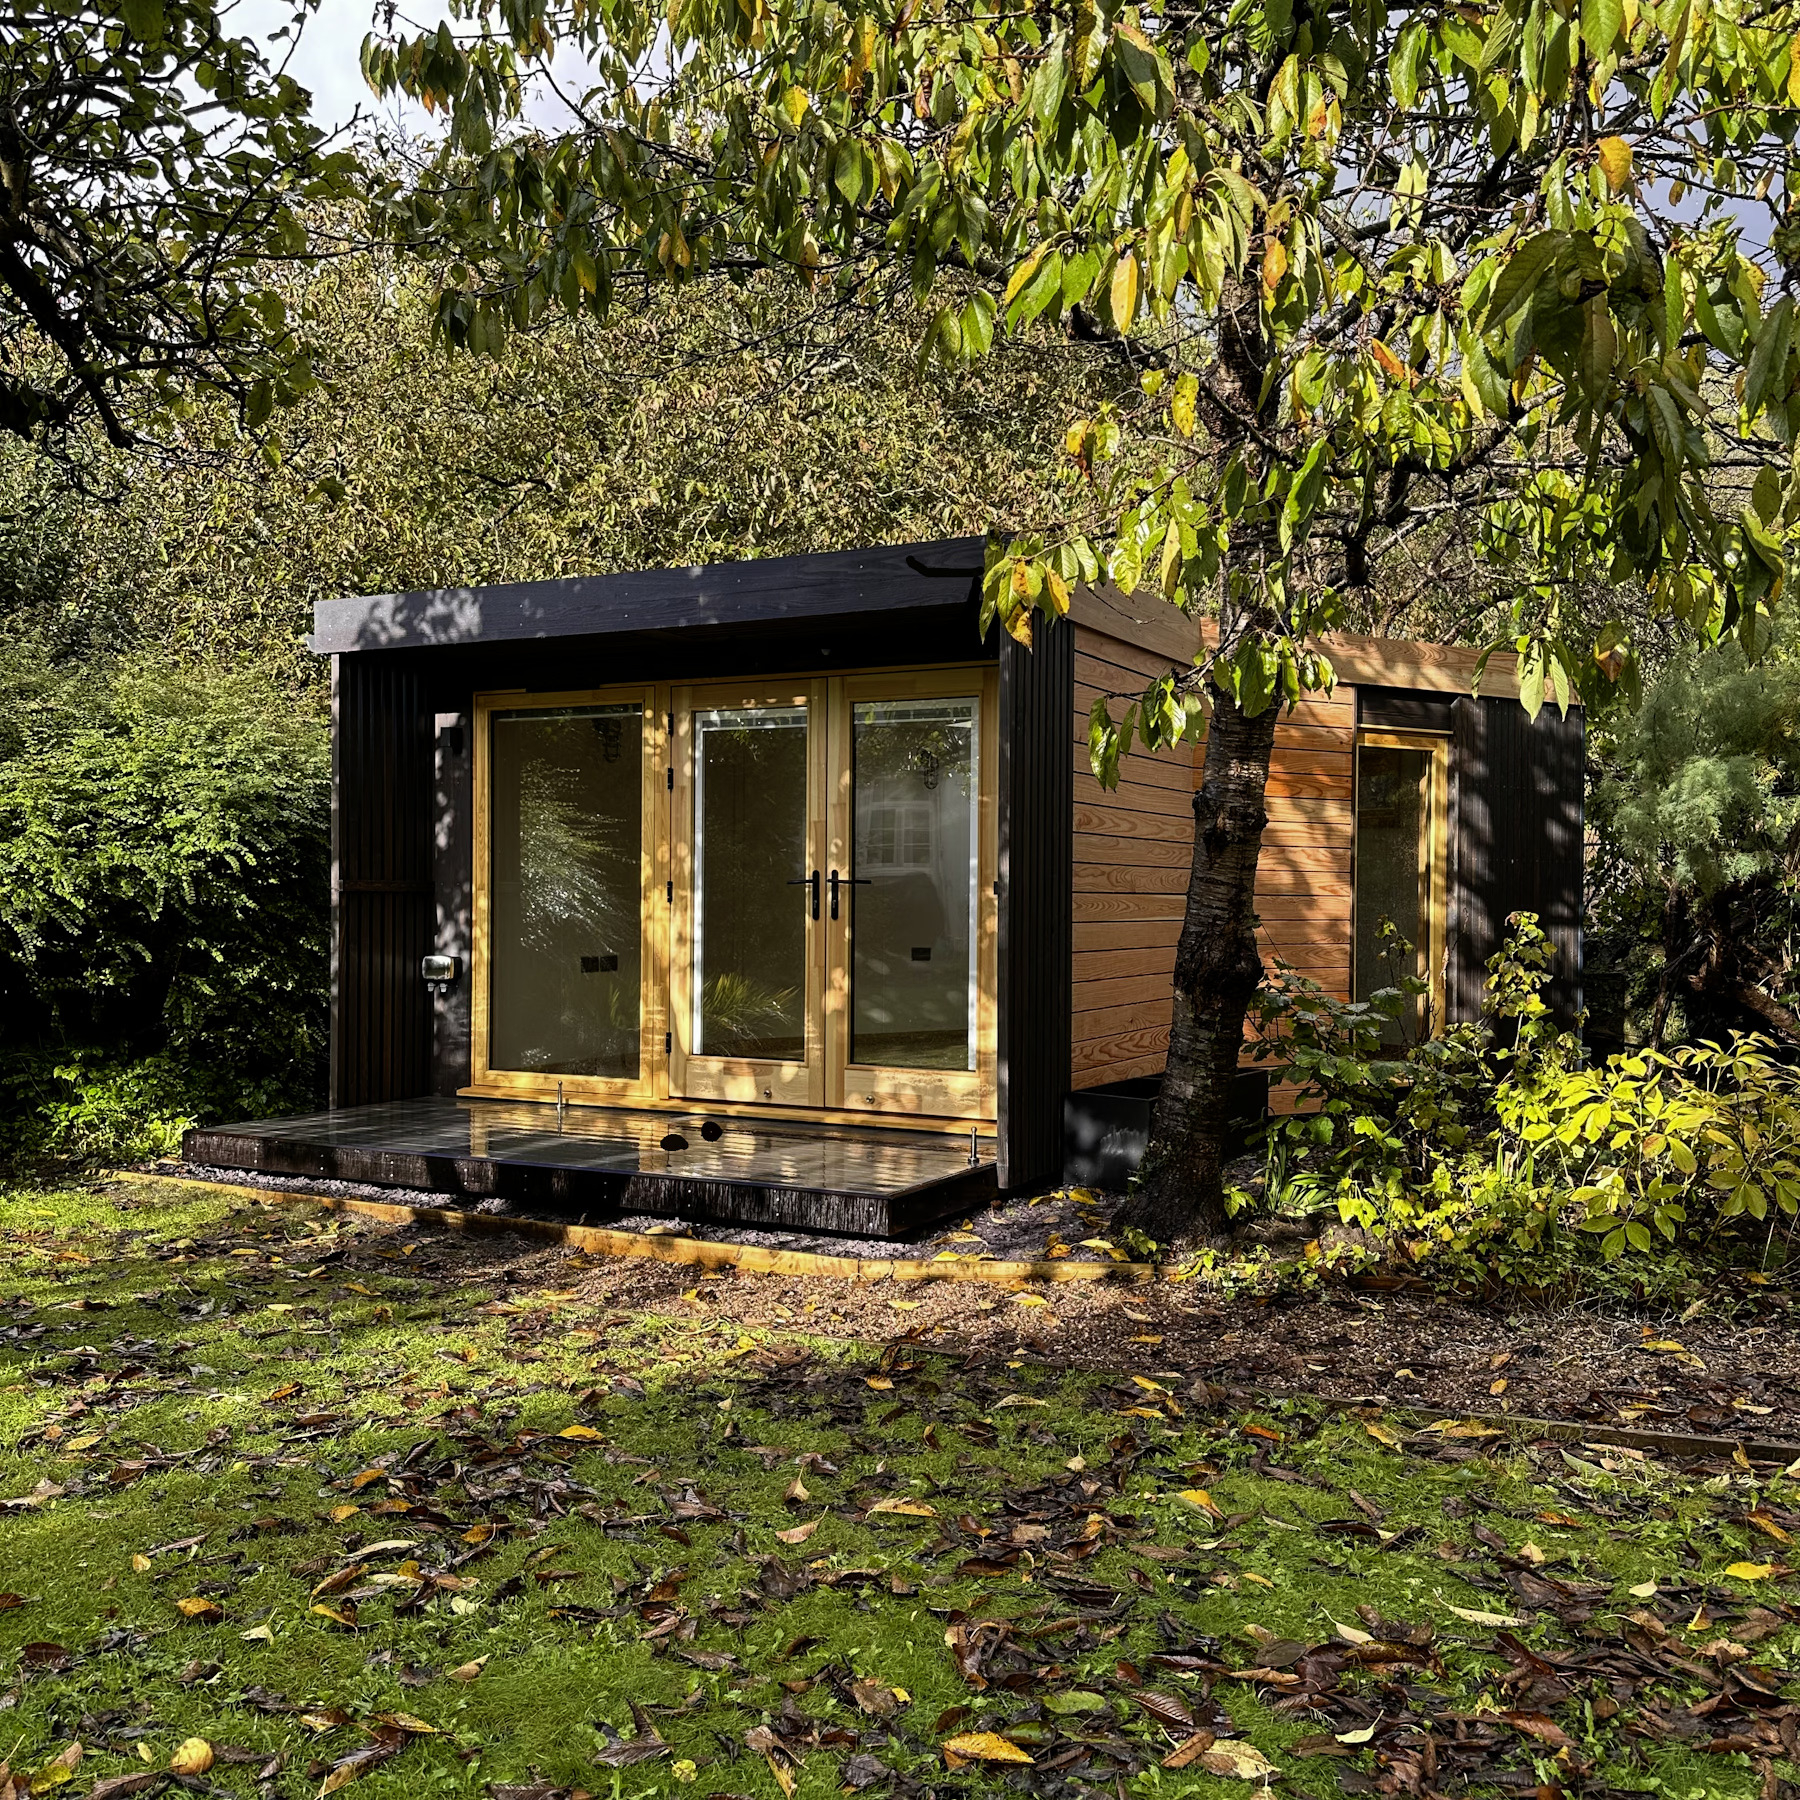 An angled cabin nestled in the trees of a North Somerset garden